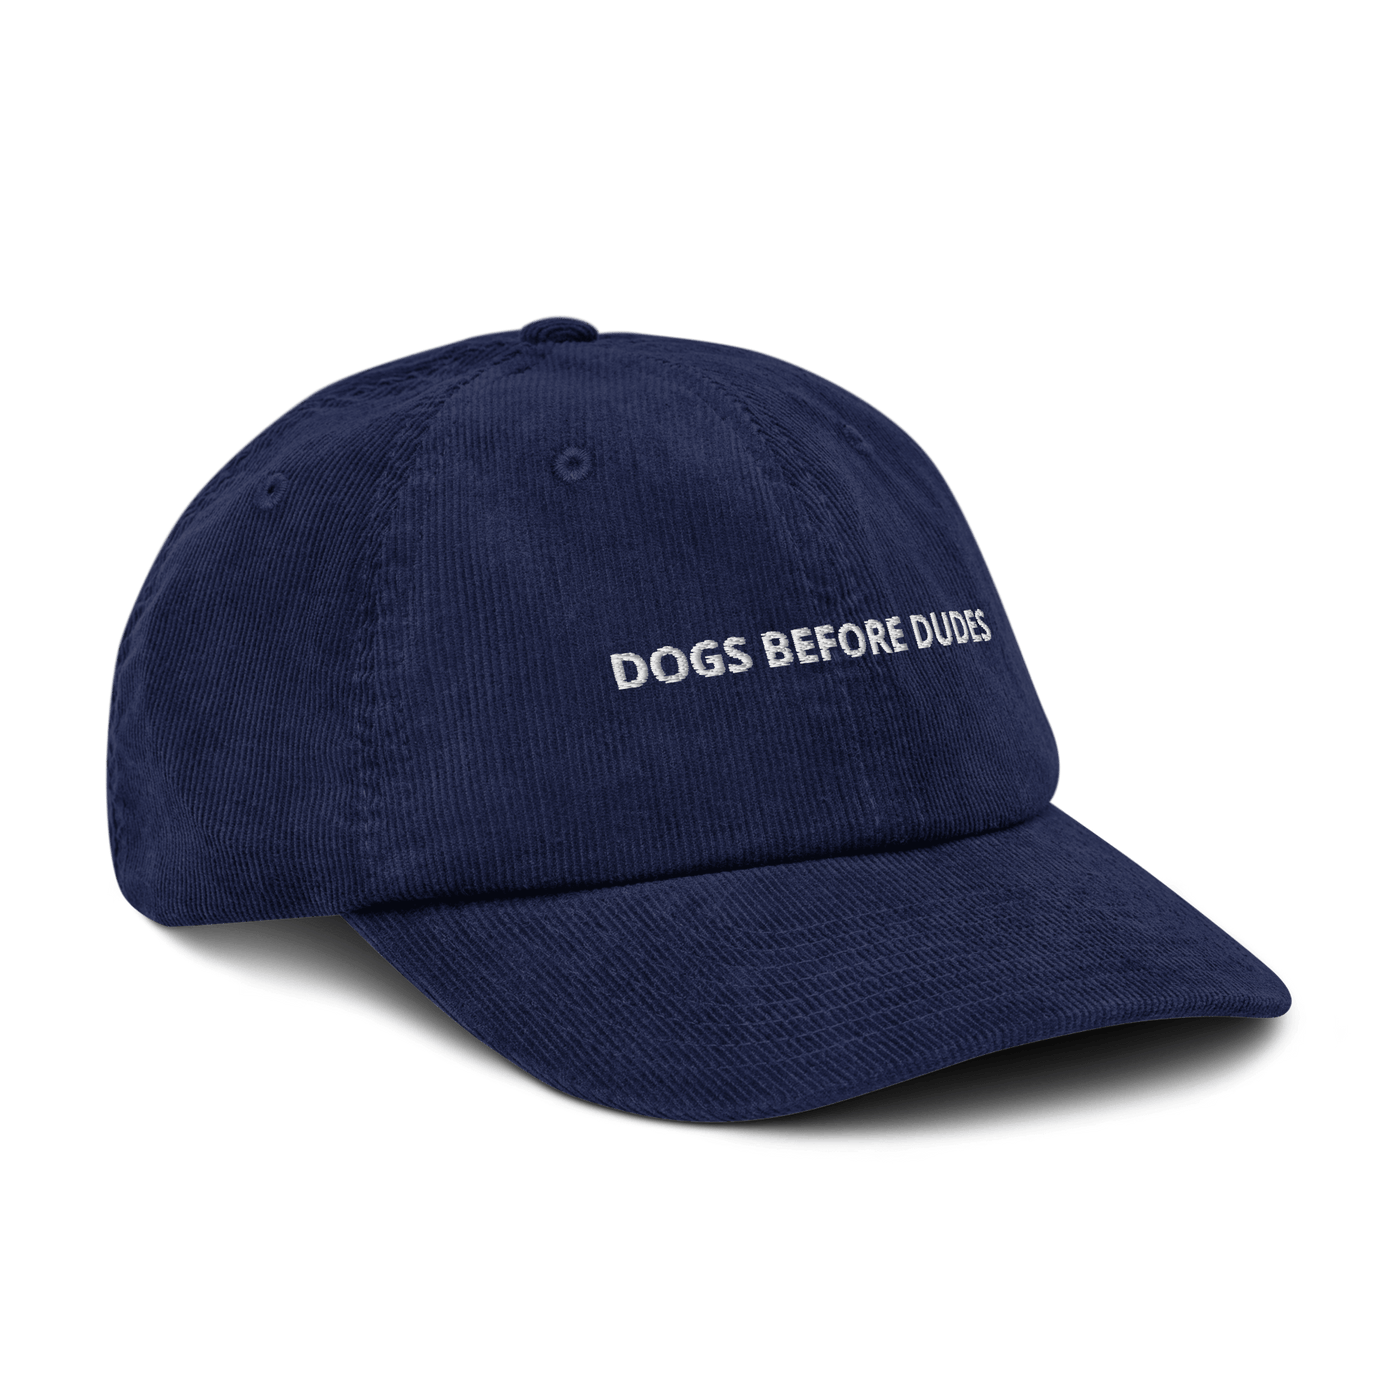 Dogs before Dudes Corduroy hat - Black - - Just Another Cap Store